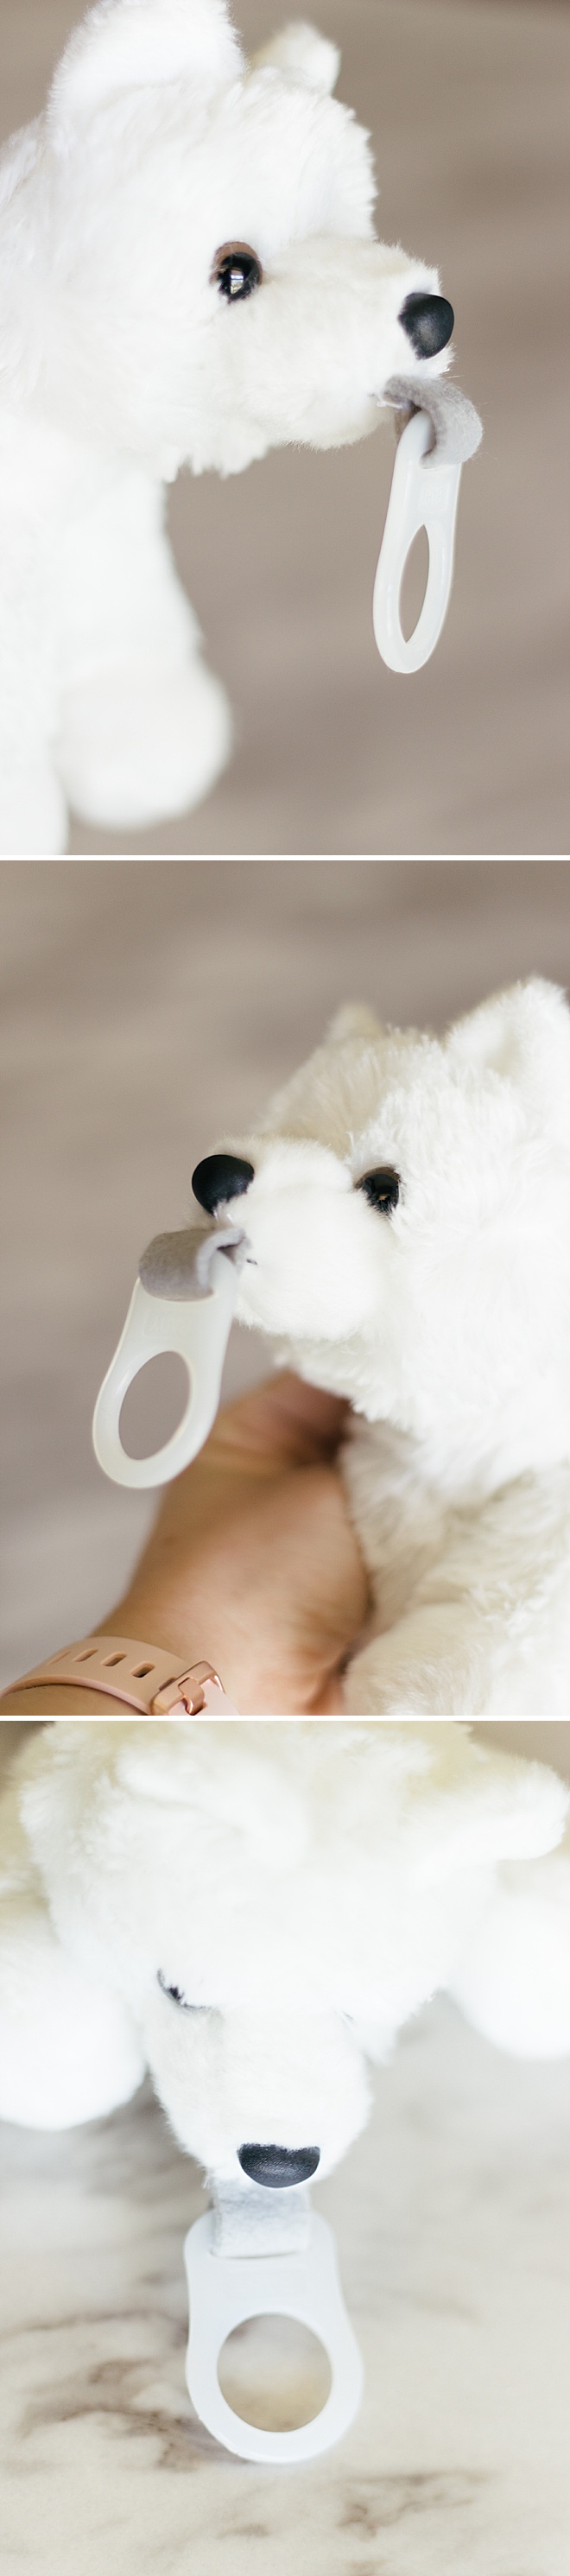 HOW CUTE! Now you can make a personalized stuffed animal pacifier holder!